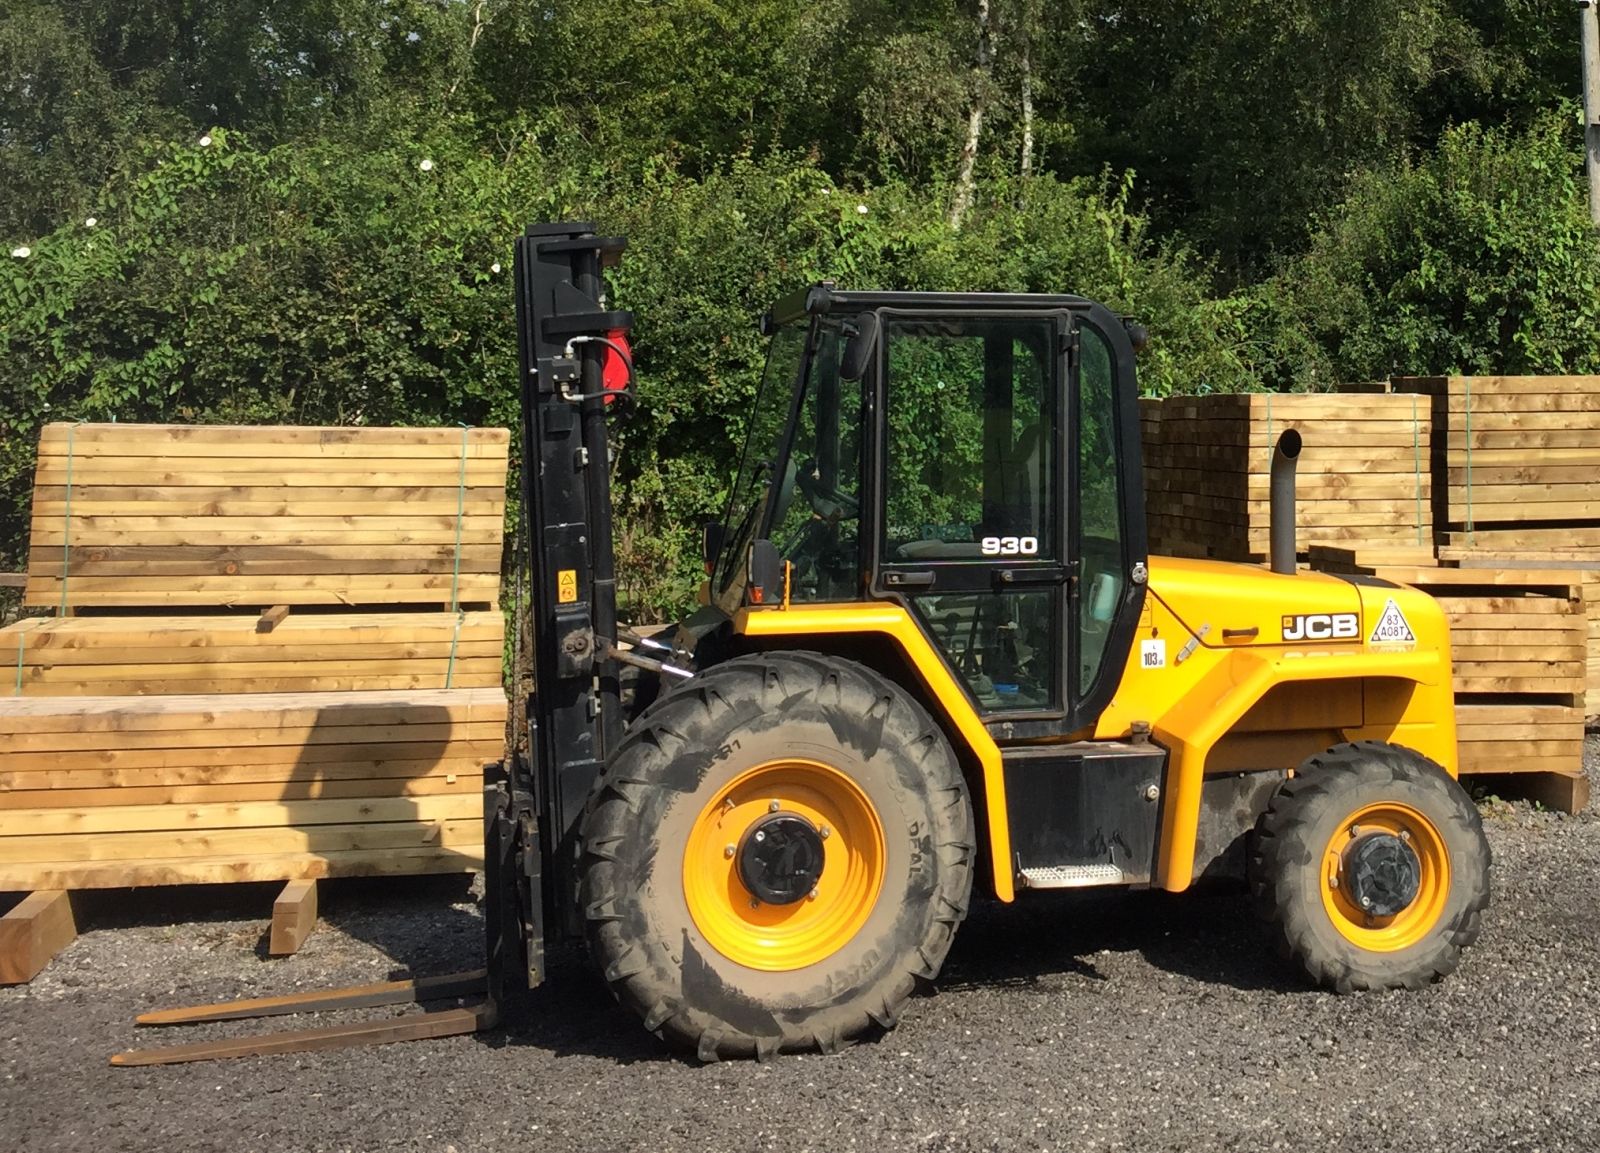 Forklifts are ideal for moving heavy railway sleepers. Railwaysleepers.com